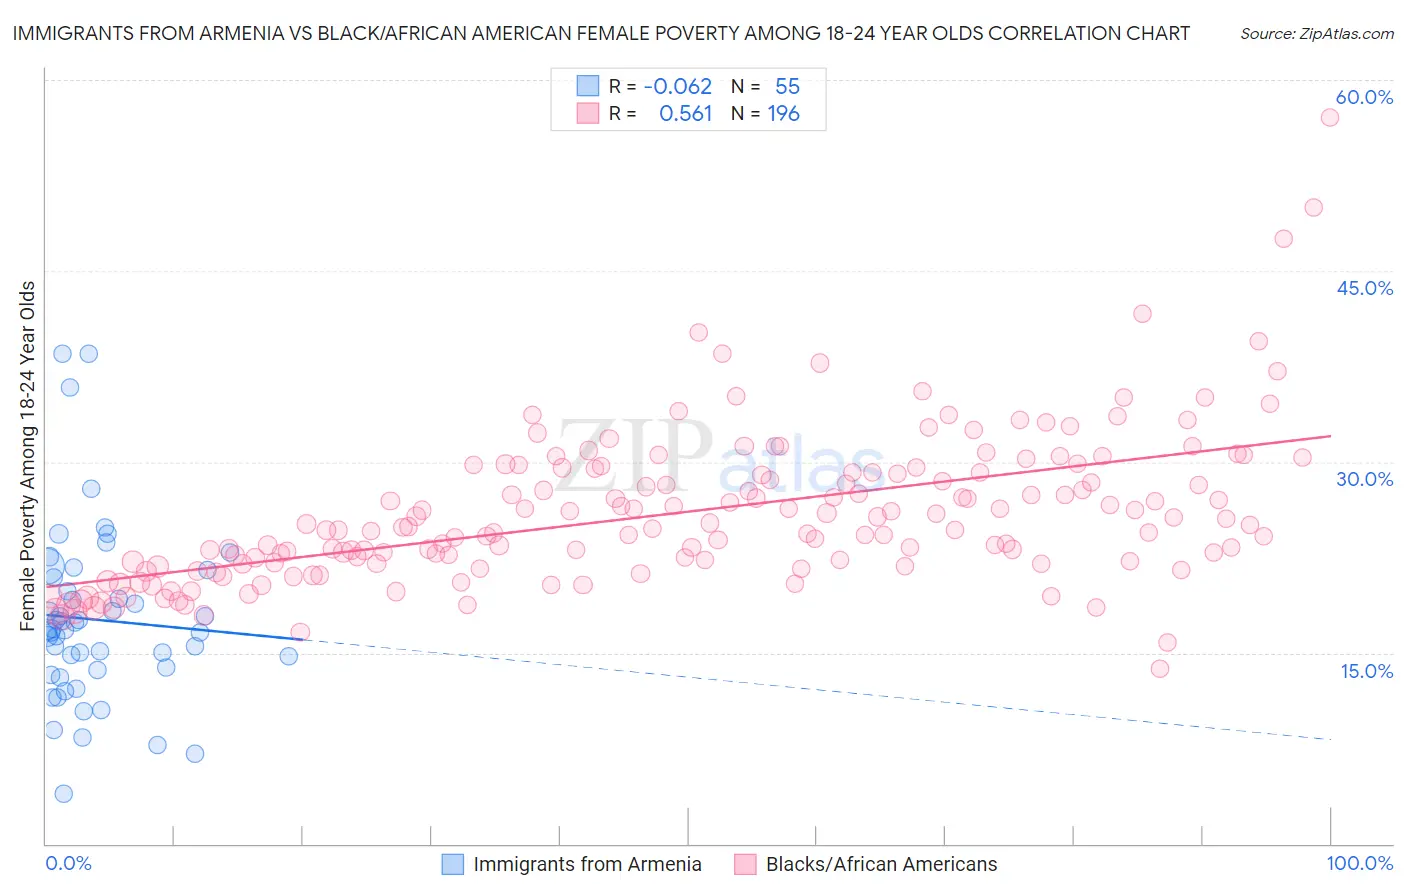 Immigrants from Armenia vs Black/African American Female Poverty Among 18-24 Year Olds